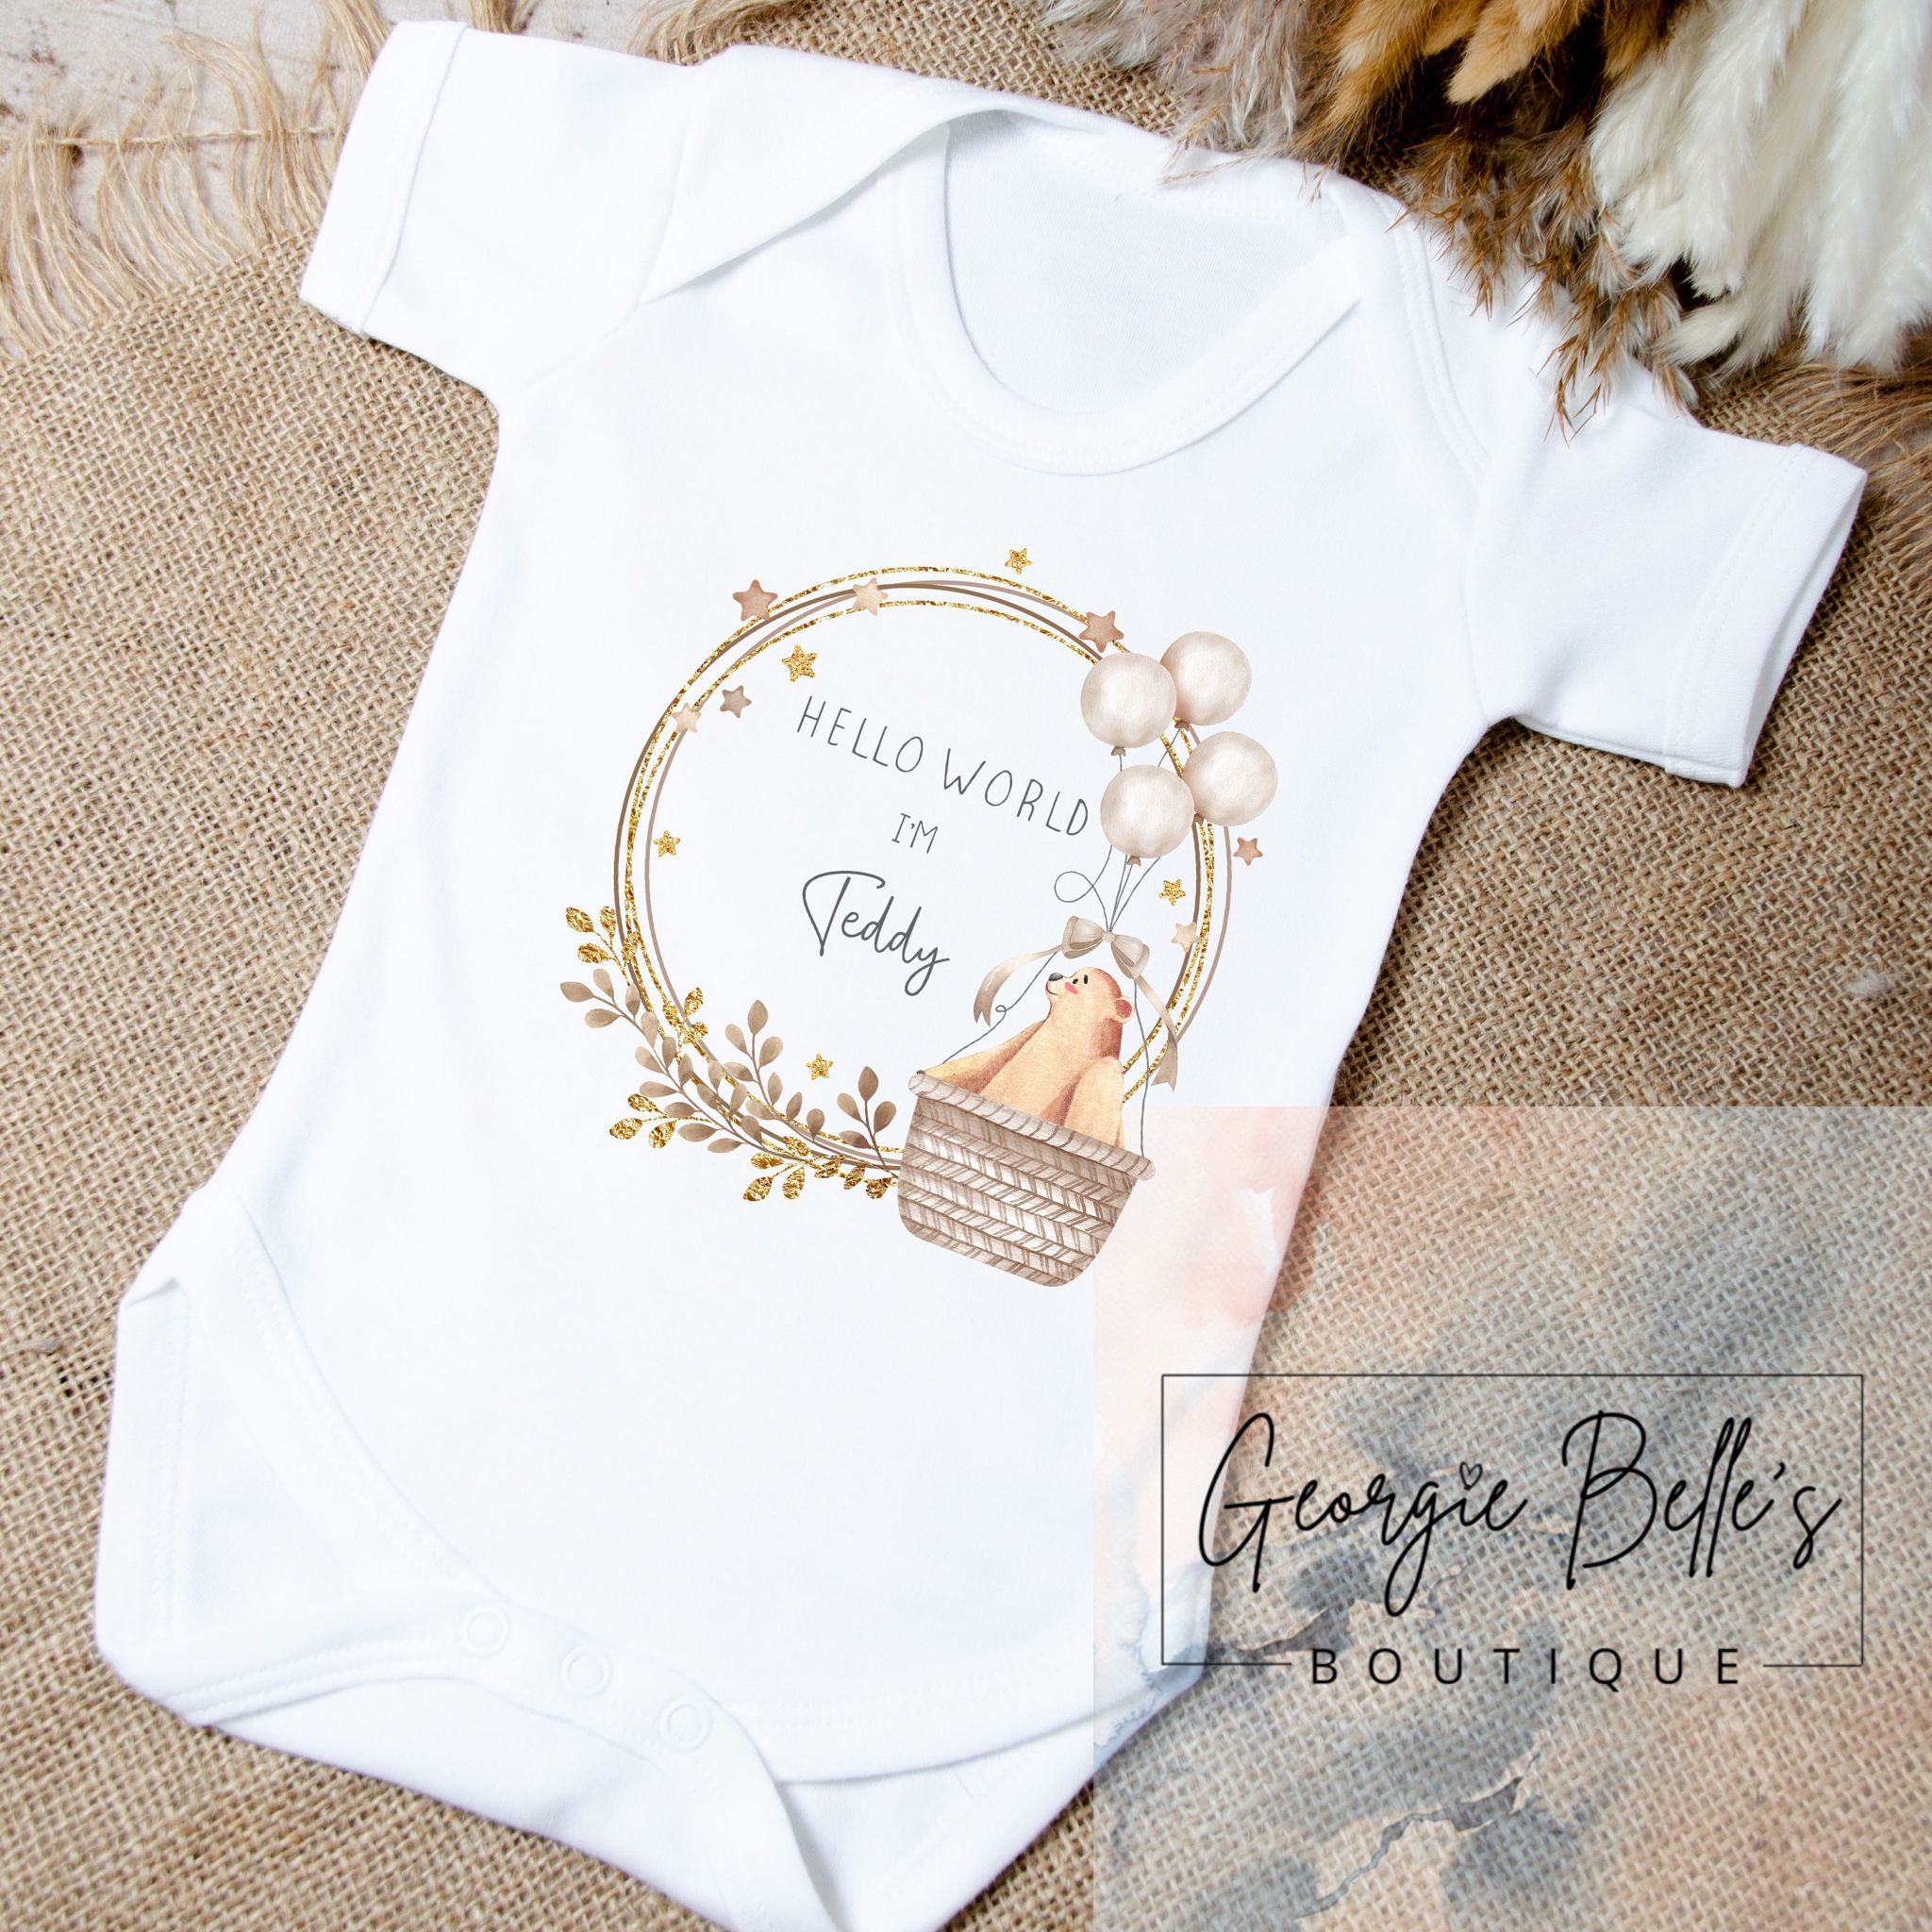 Personalised Announcement Vest / Babygrow - Gold/Nude Hot Air Balloon Wreath Design